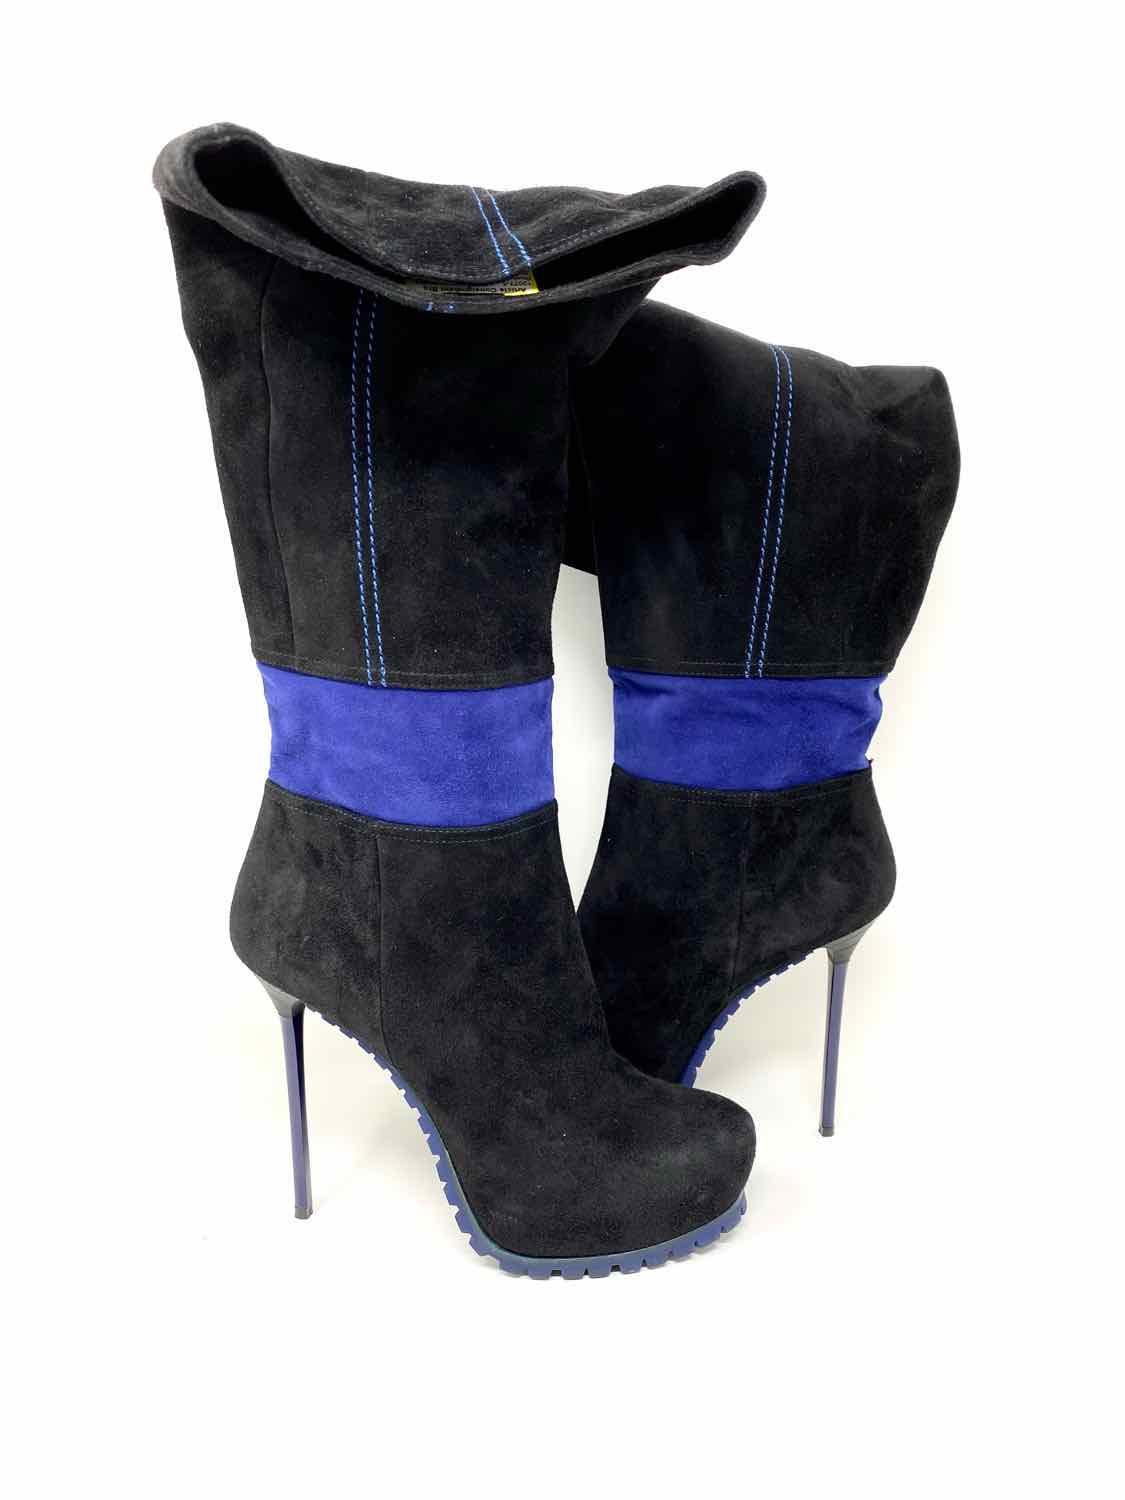 Chanel Black Shimmer Suede Knee High Boots | DBLTKE Luxury Consignment Boutique